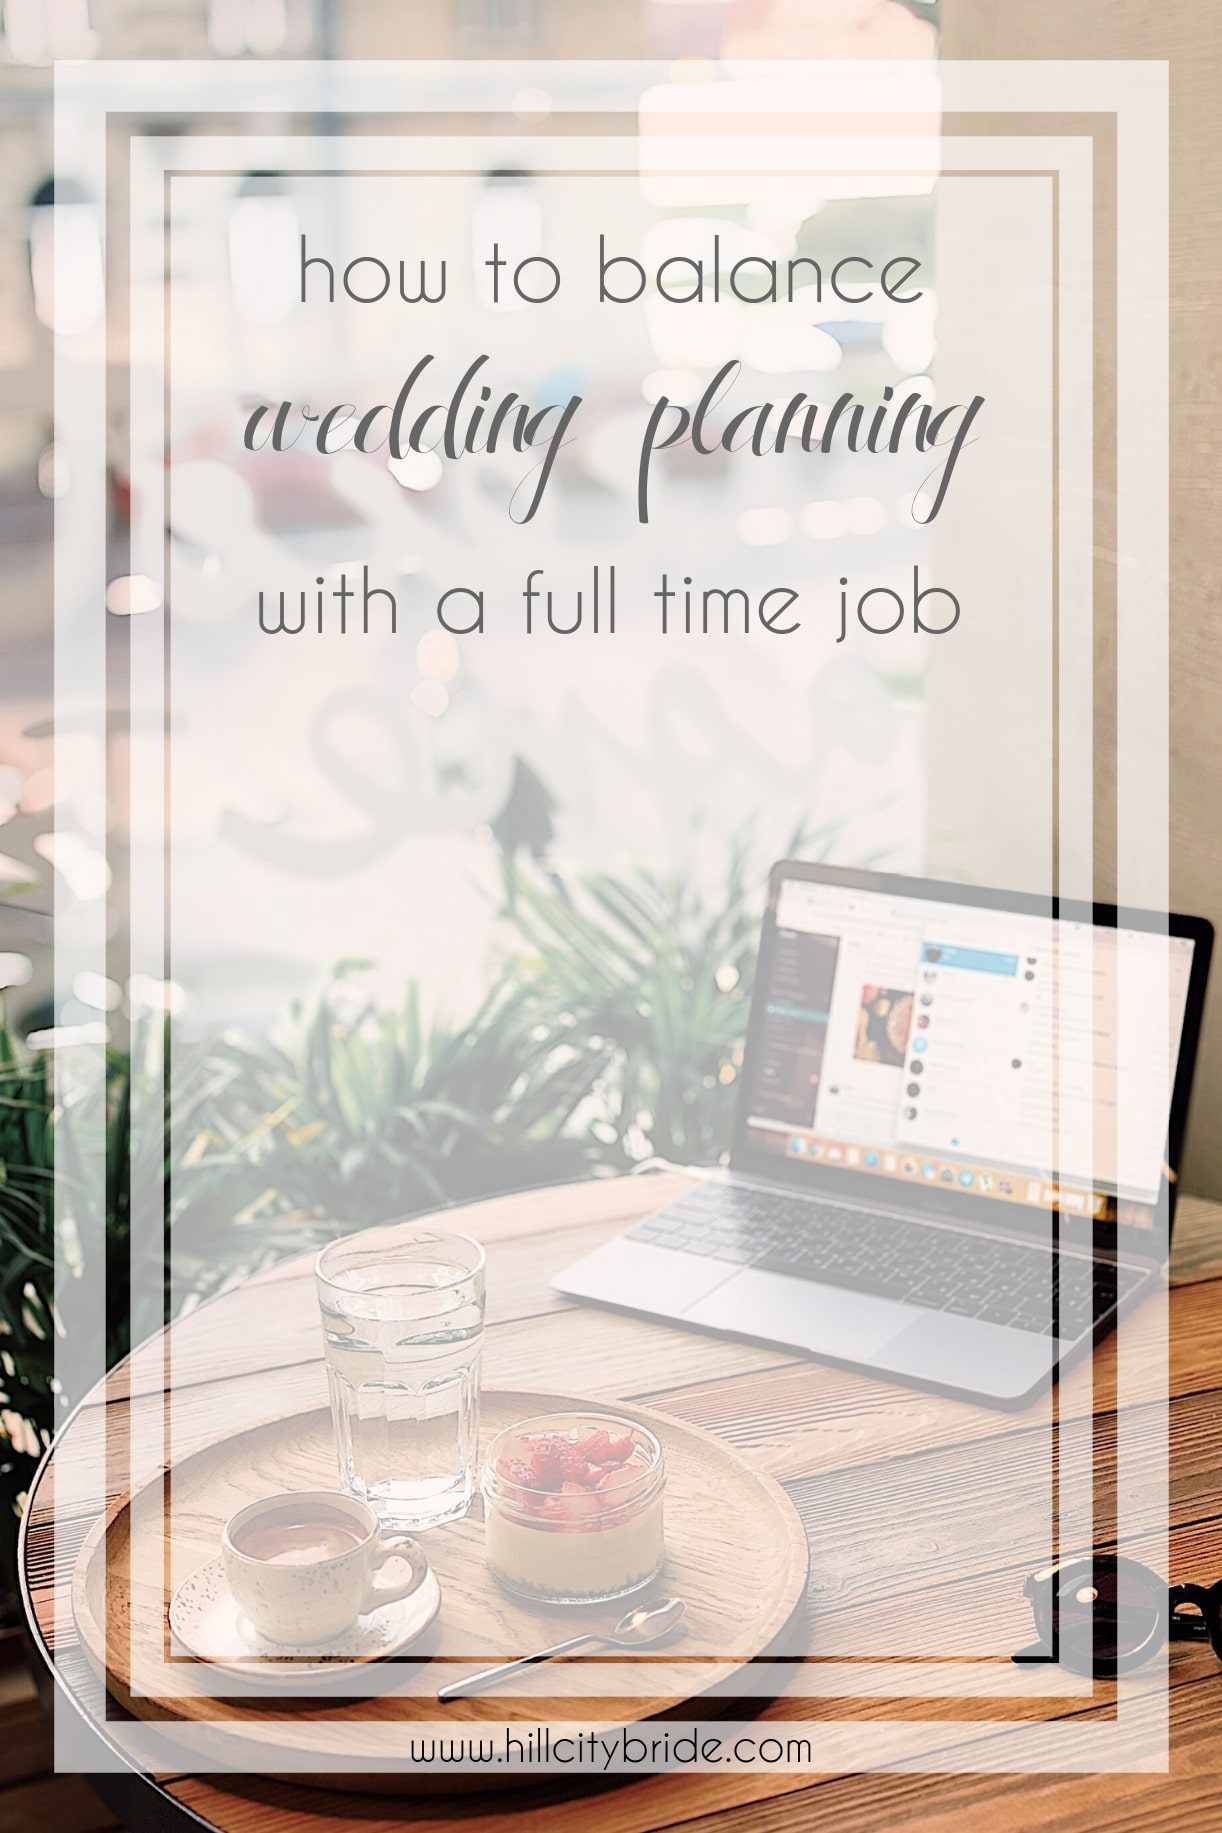 How to Balance Wedding Planning with a Full Time Job | Hill City Bride Virginia Weddings Blog